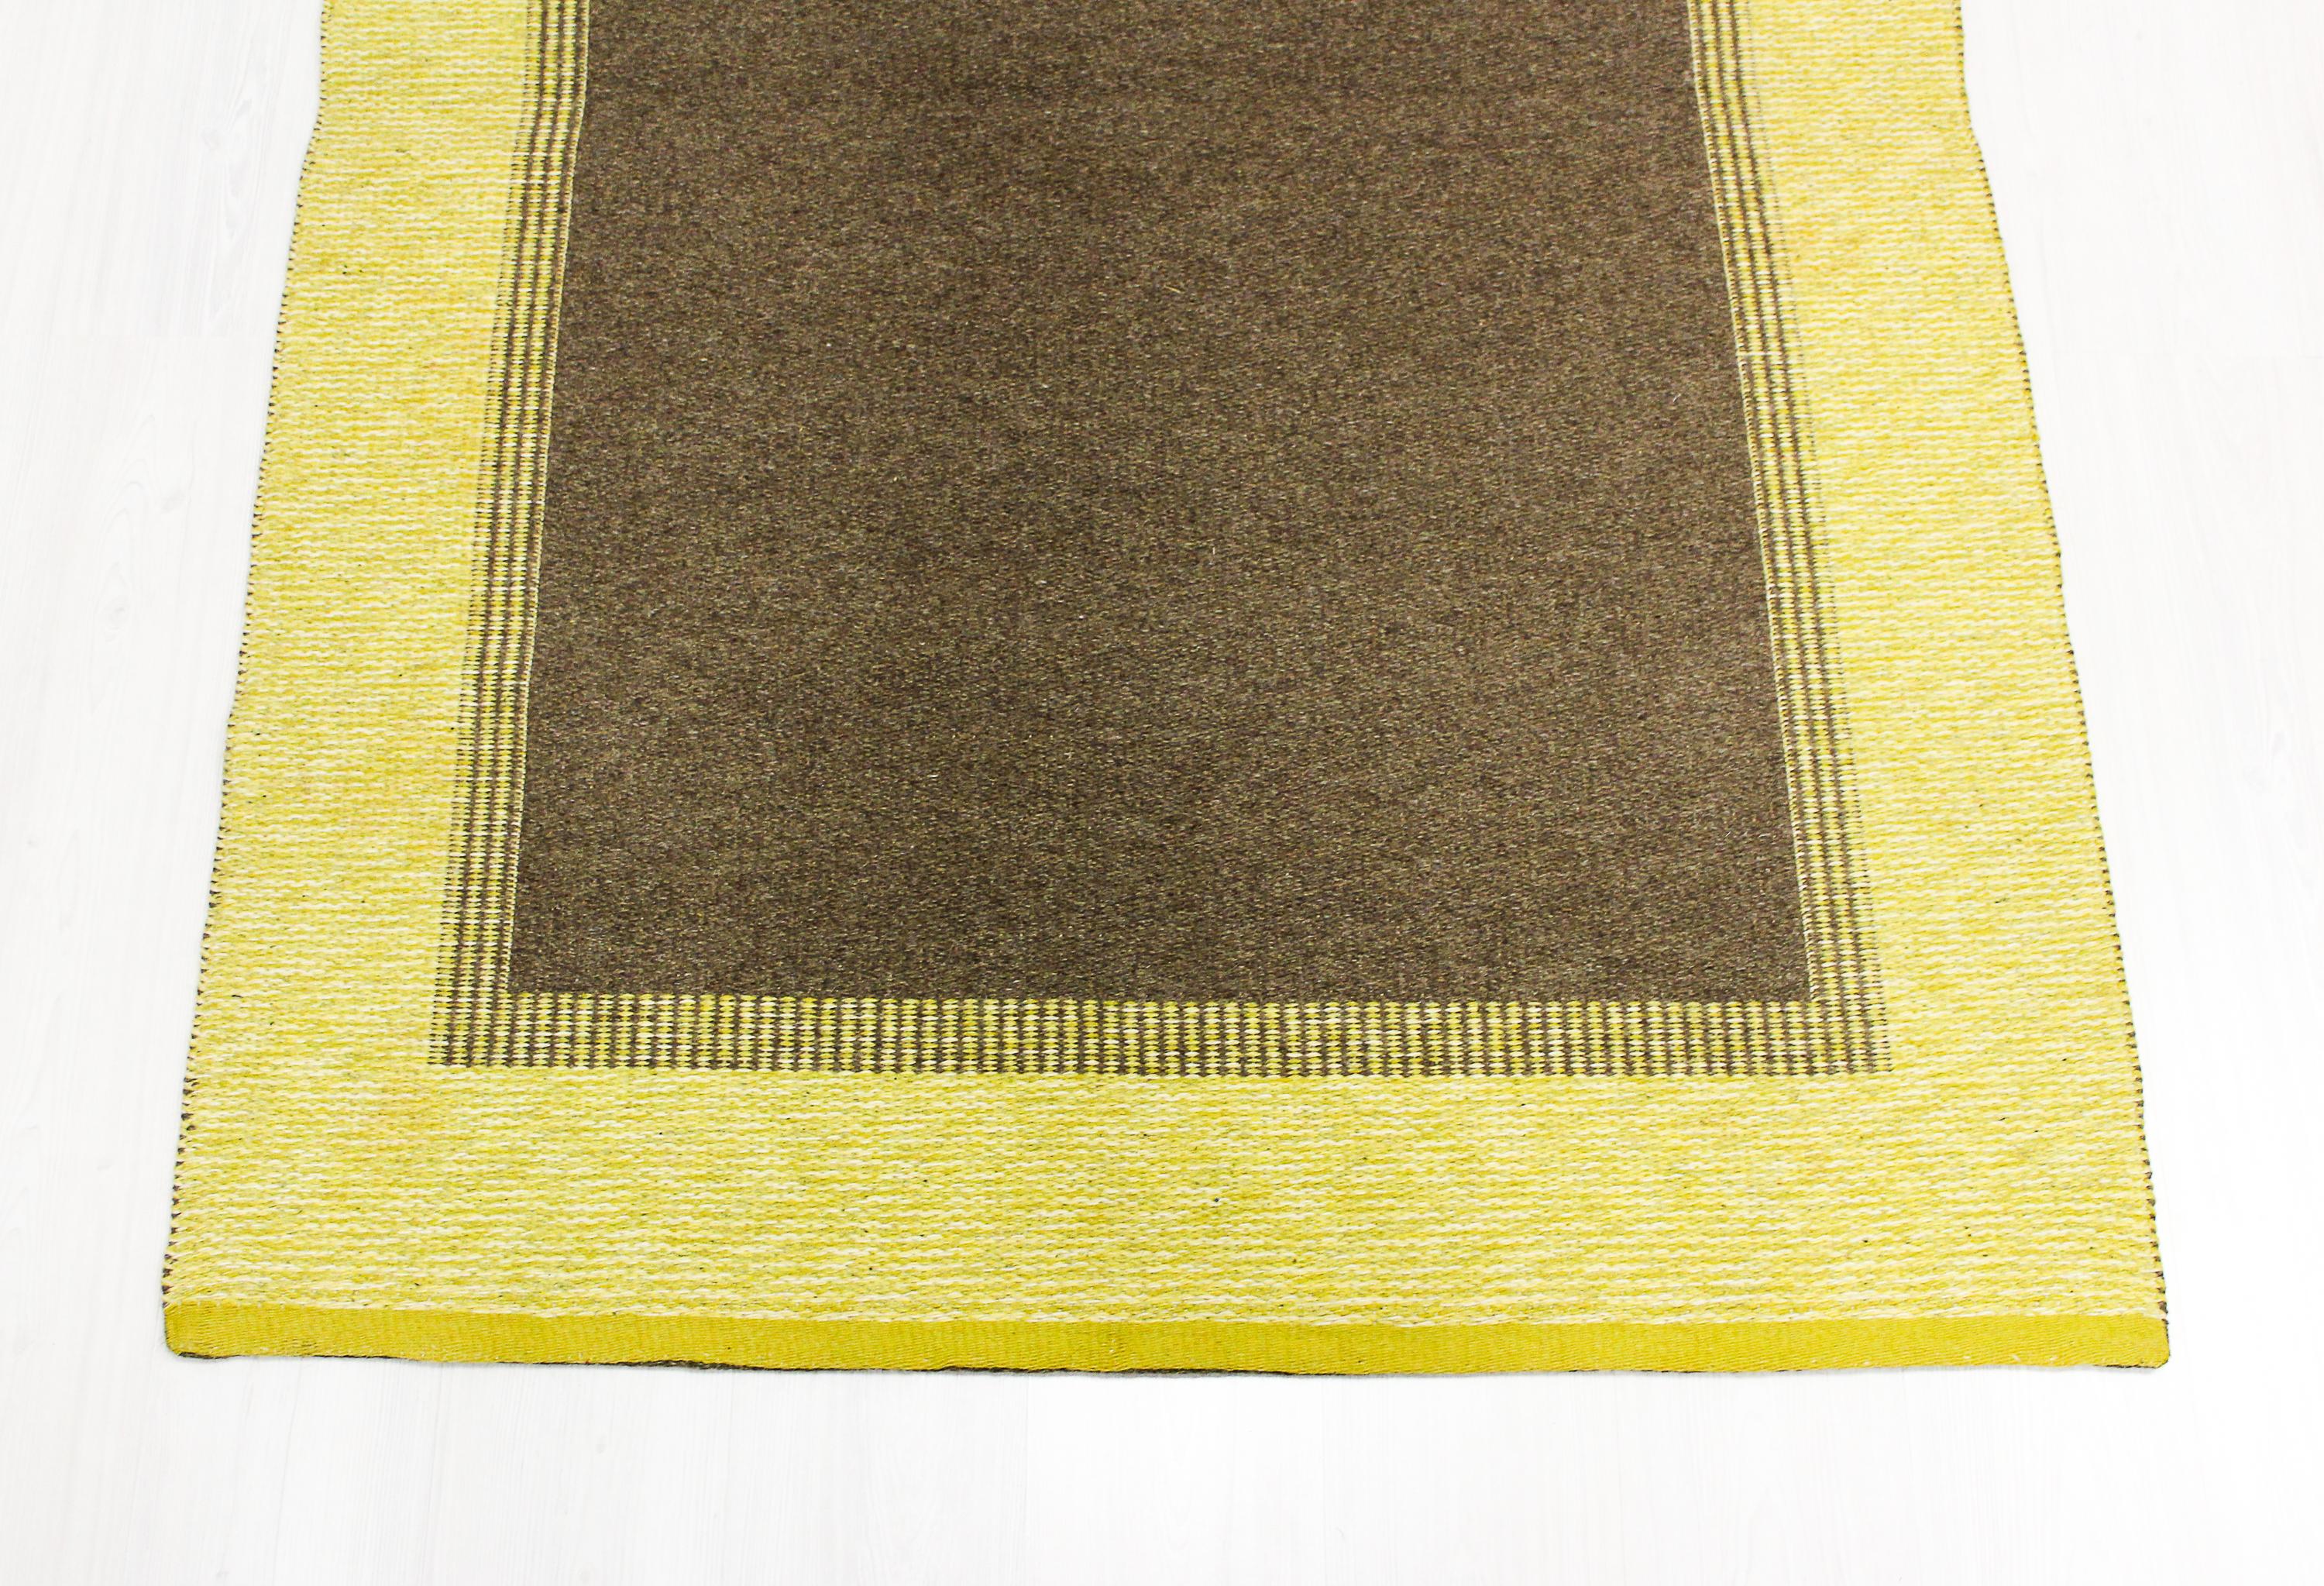 A midcentury Swedish flat-weave carpet by unknown designer. The carpet is made with double weave technique which and can therefore be used with both sides up. Very good vintage condition but there is one stain on one side that doesn't show on the